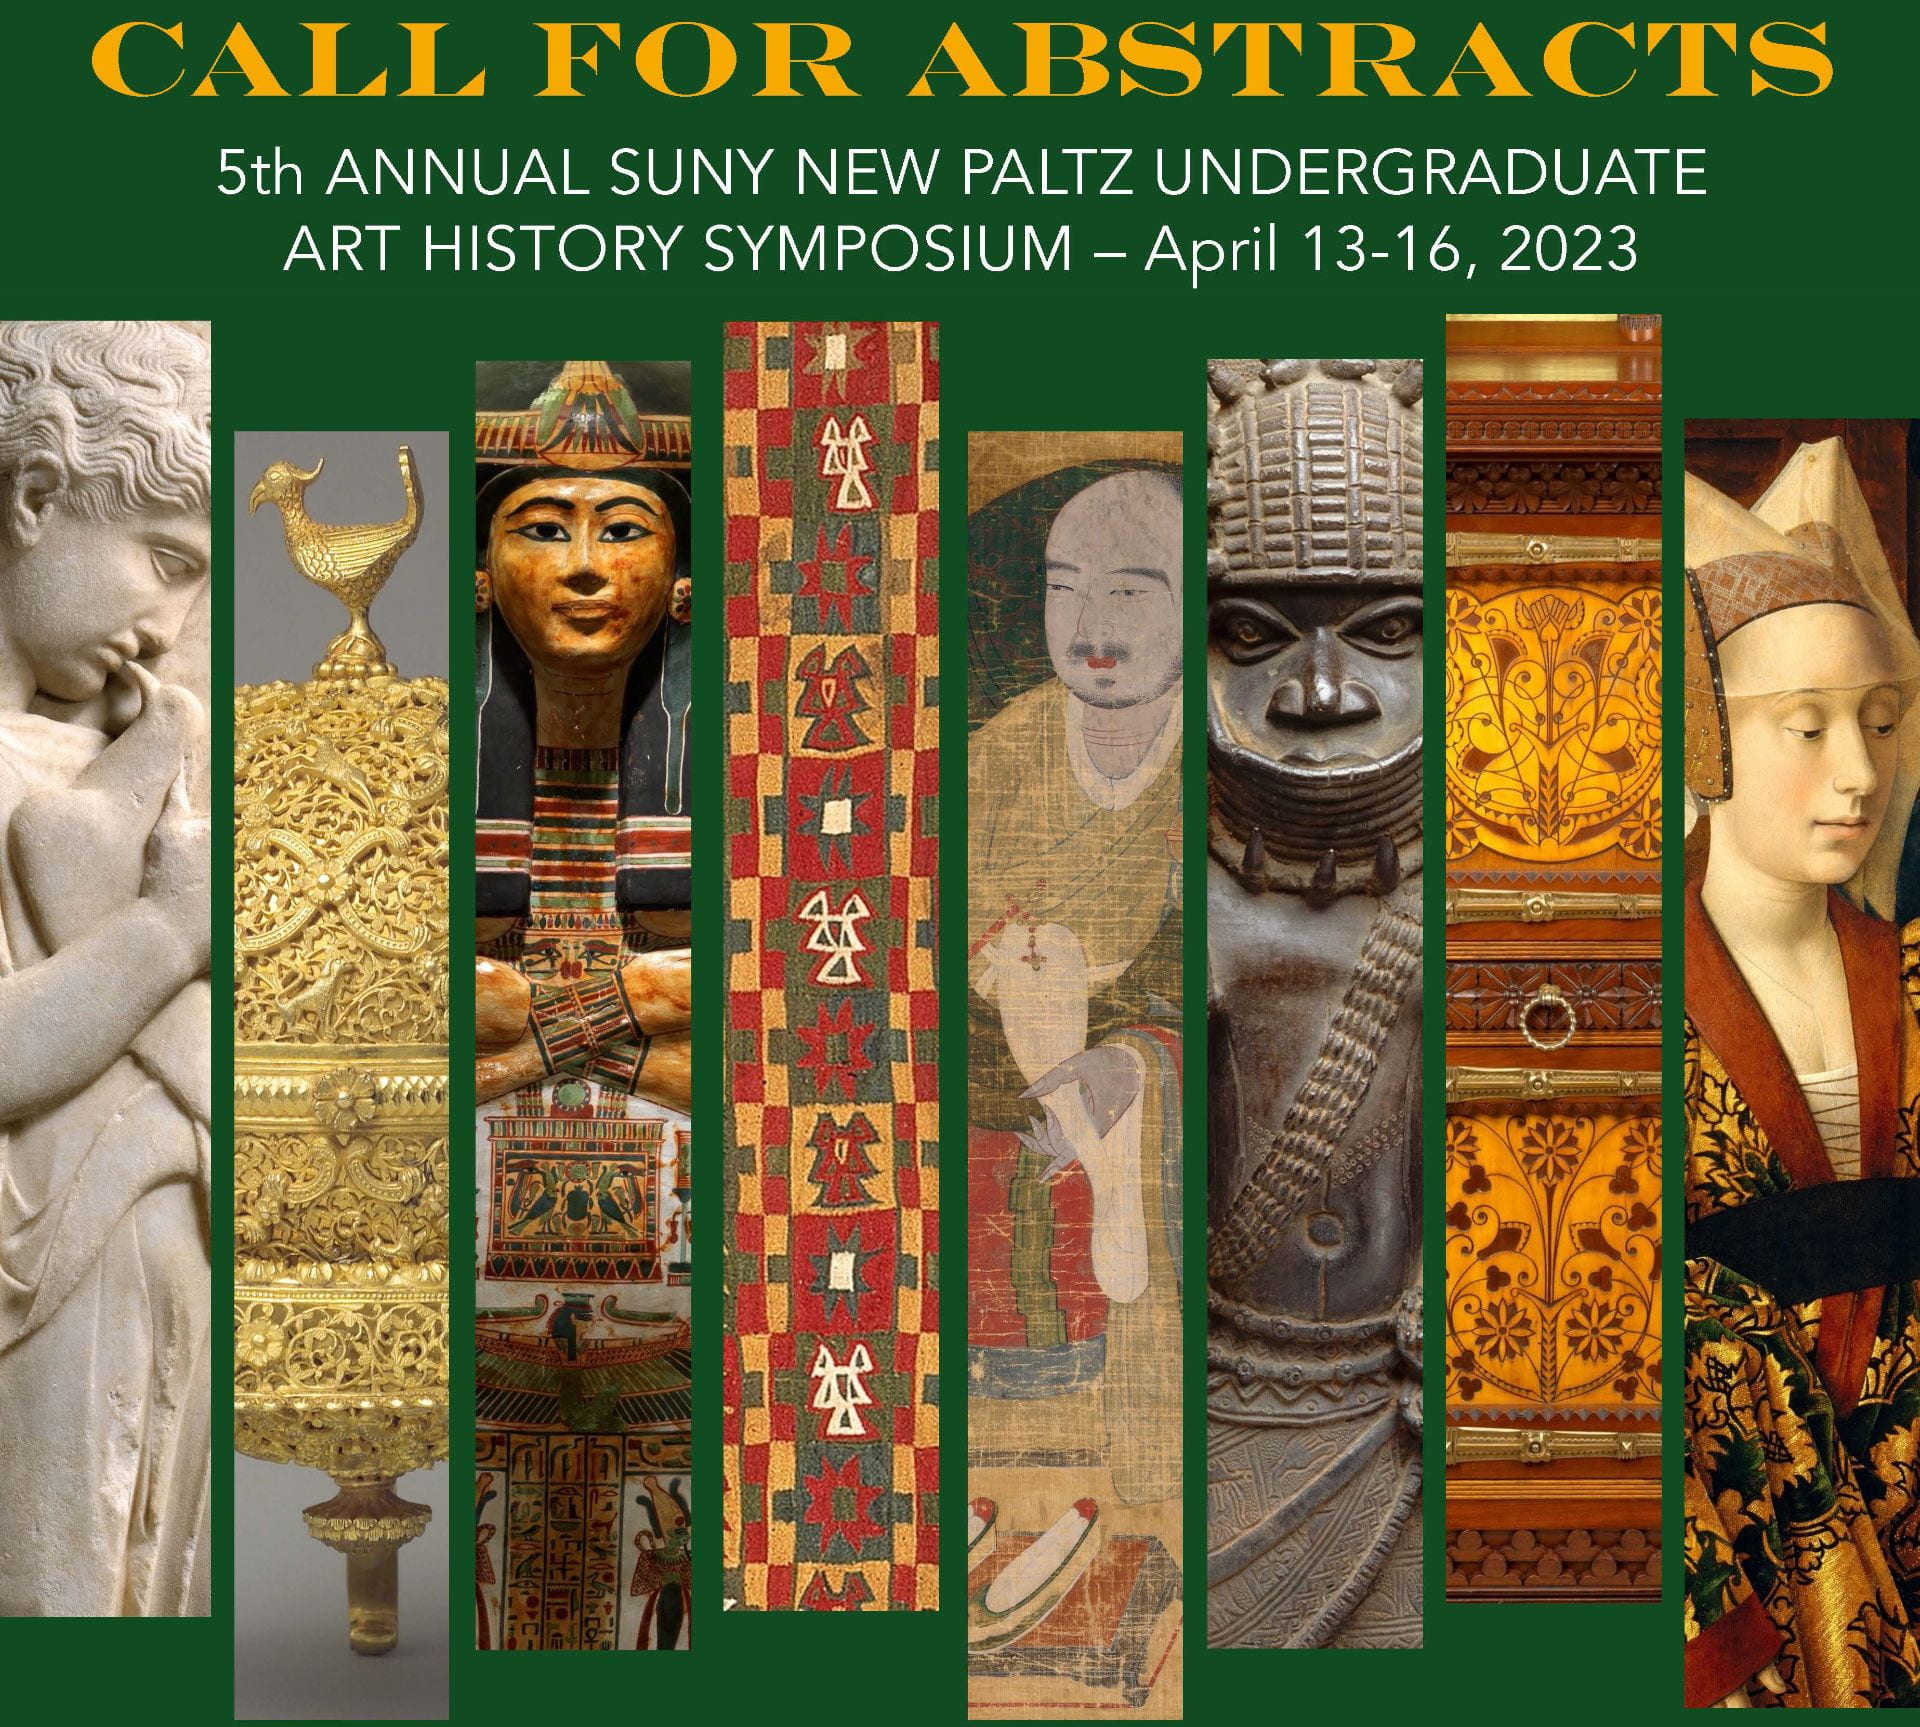 Call for Abstracts: 5th Annual SUNY New Paltz Undergraduate Art History Symposium, April 13-16, 2023